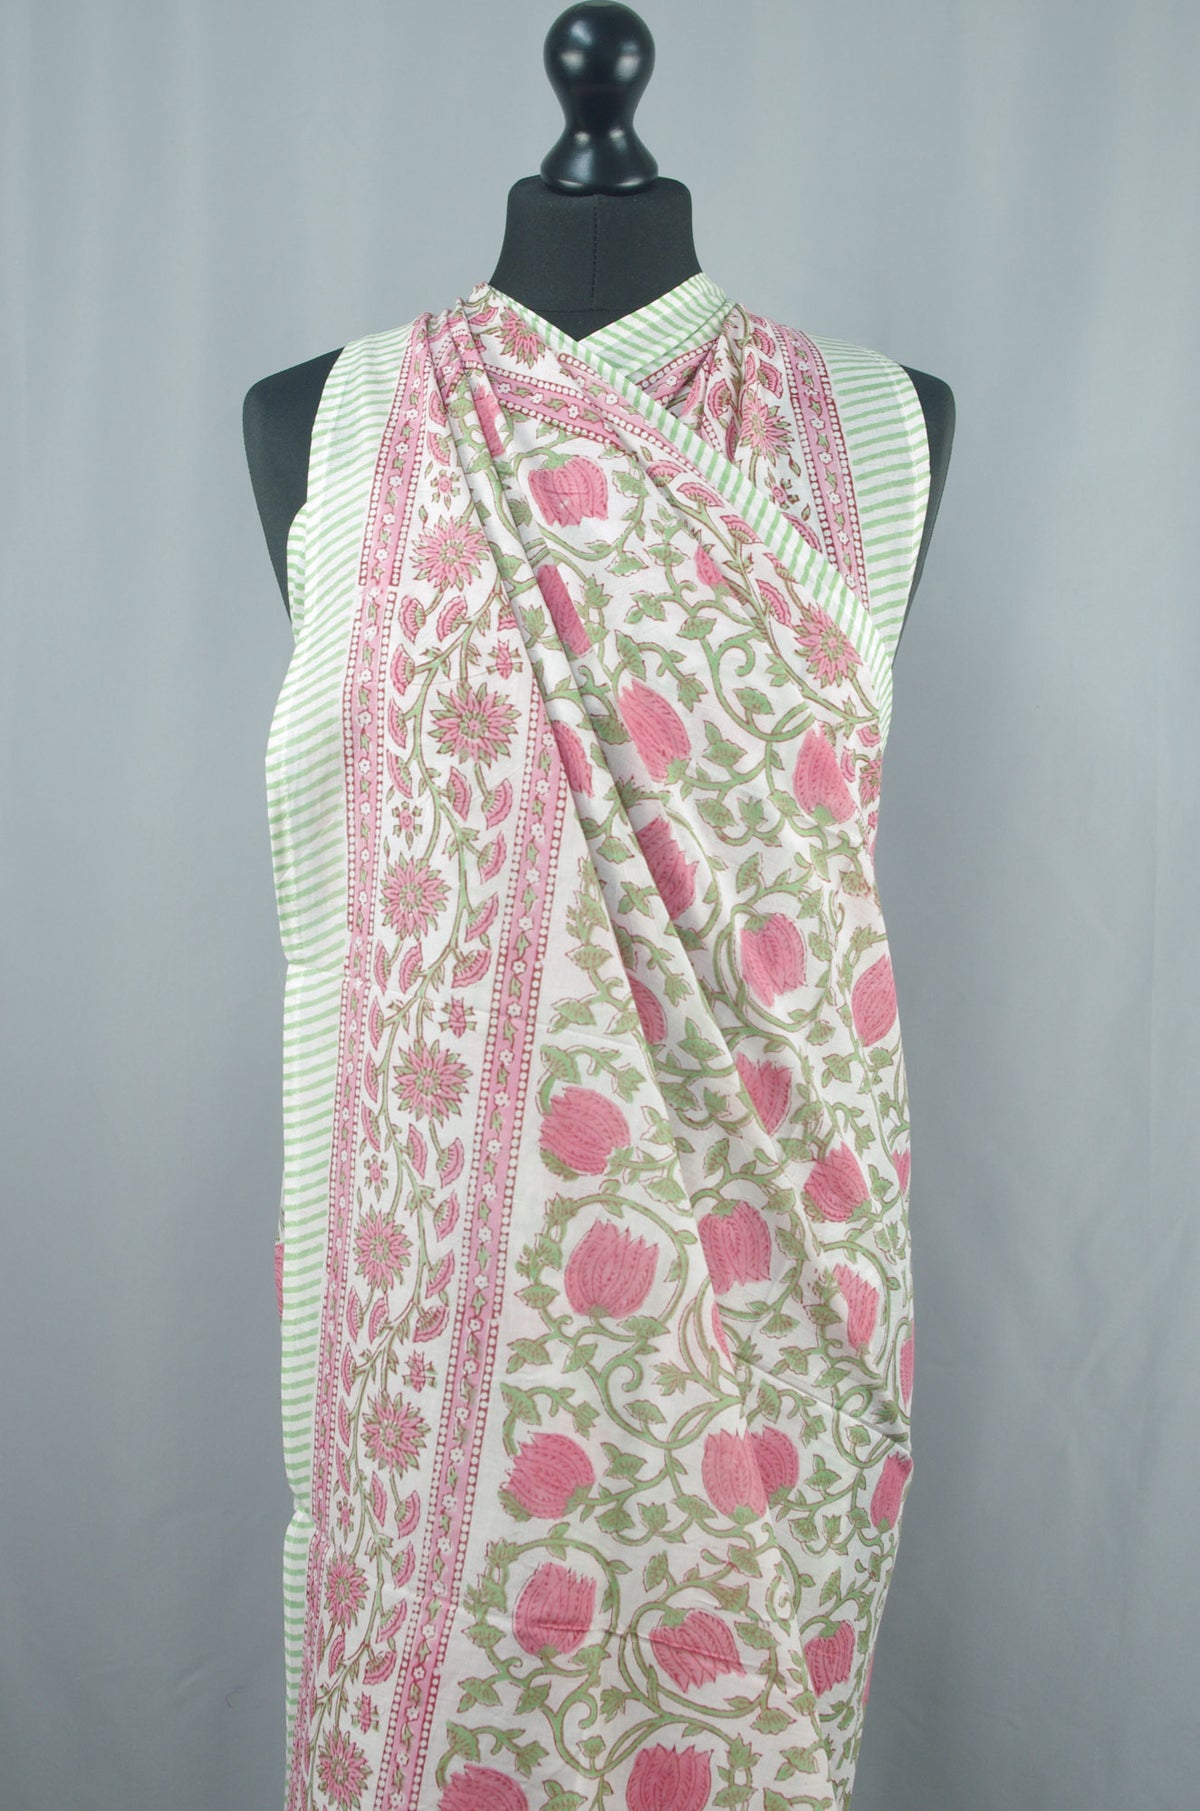 Beach Coverup Sarong Pareo - Pink Bells On Cream Base